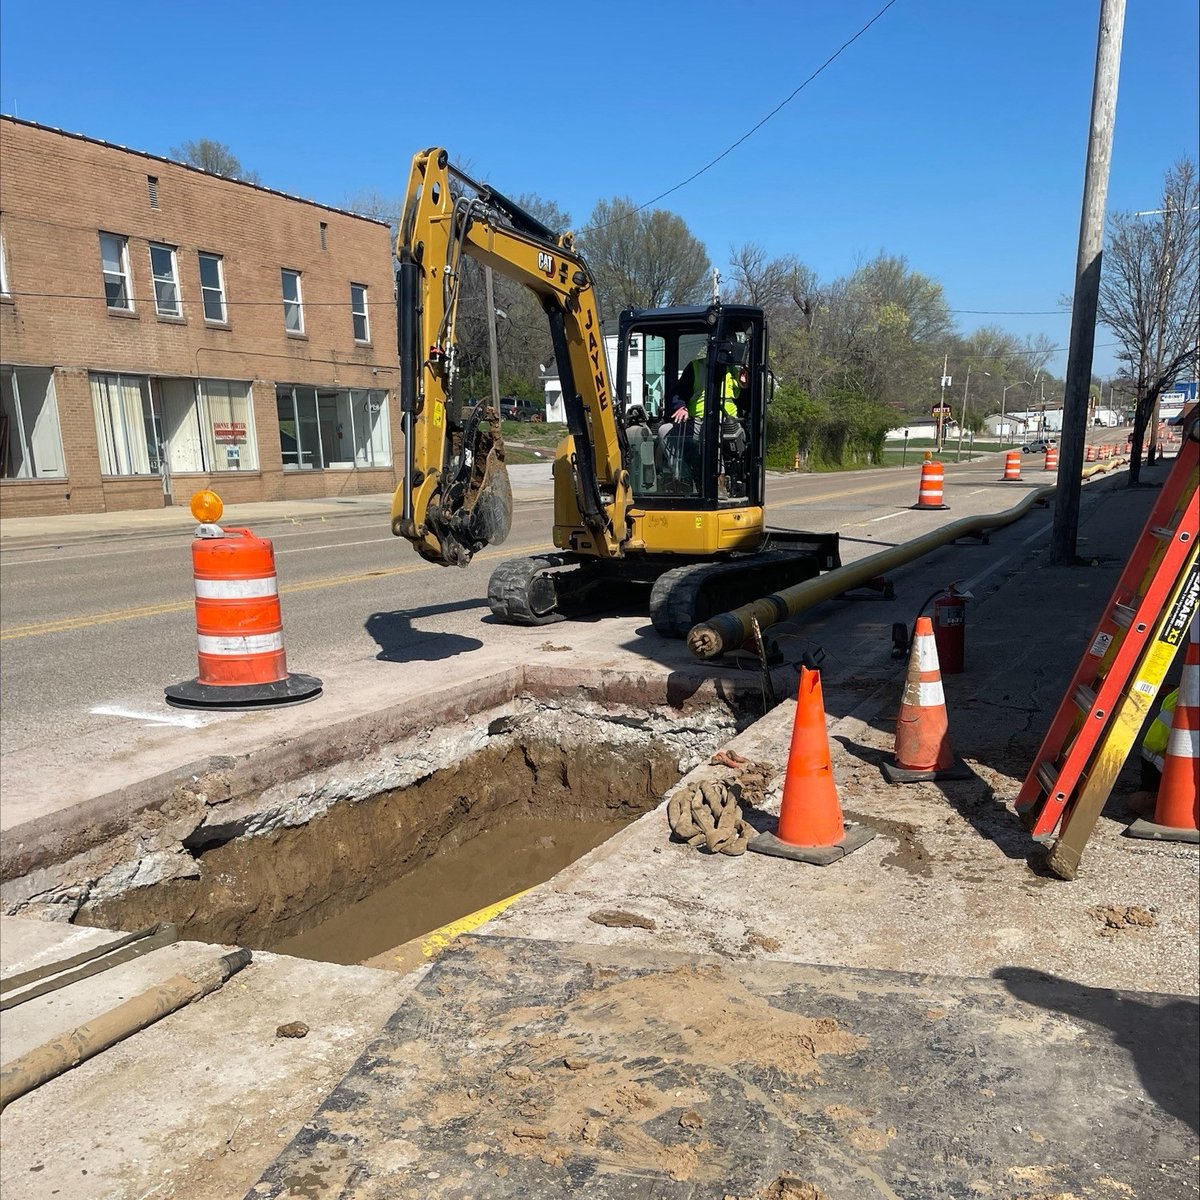 Upgrading one mile of natural gas steel pipeline in Alton with modern, corrosion-resistant polyethylene material to ensure continued safe, reliable delivery of natural gas for our customers.